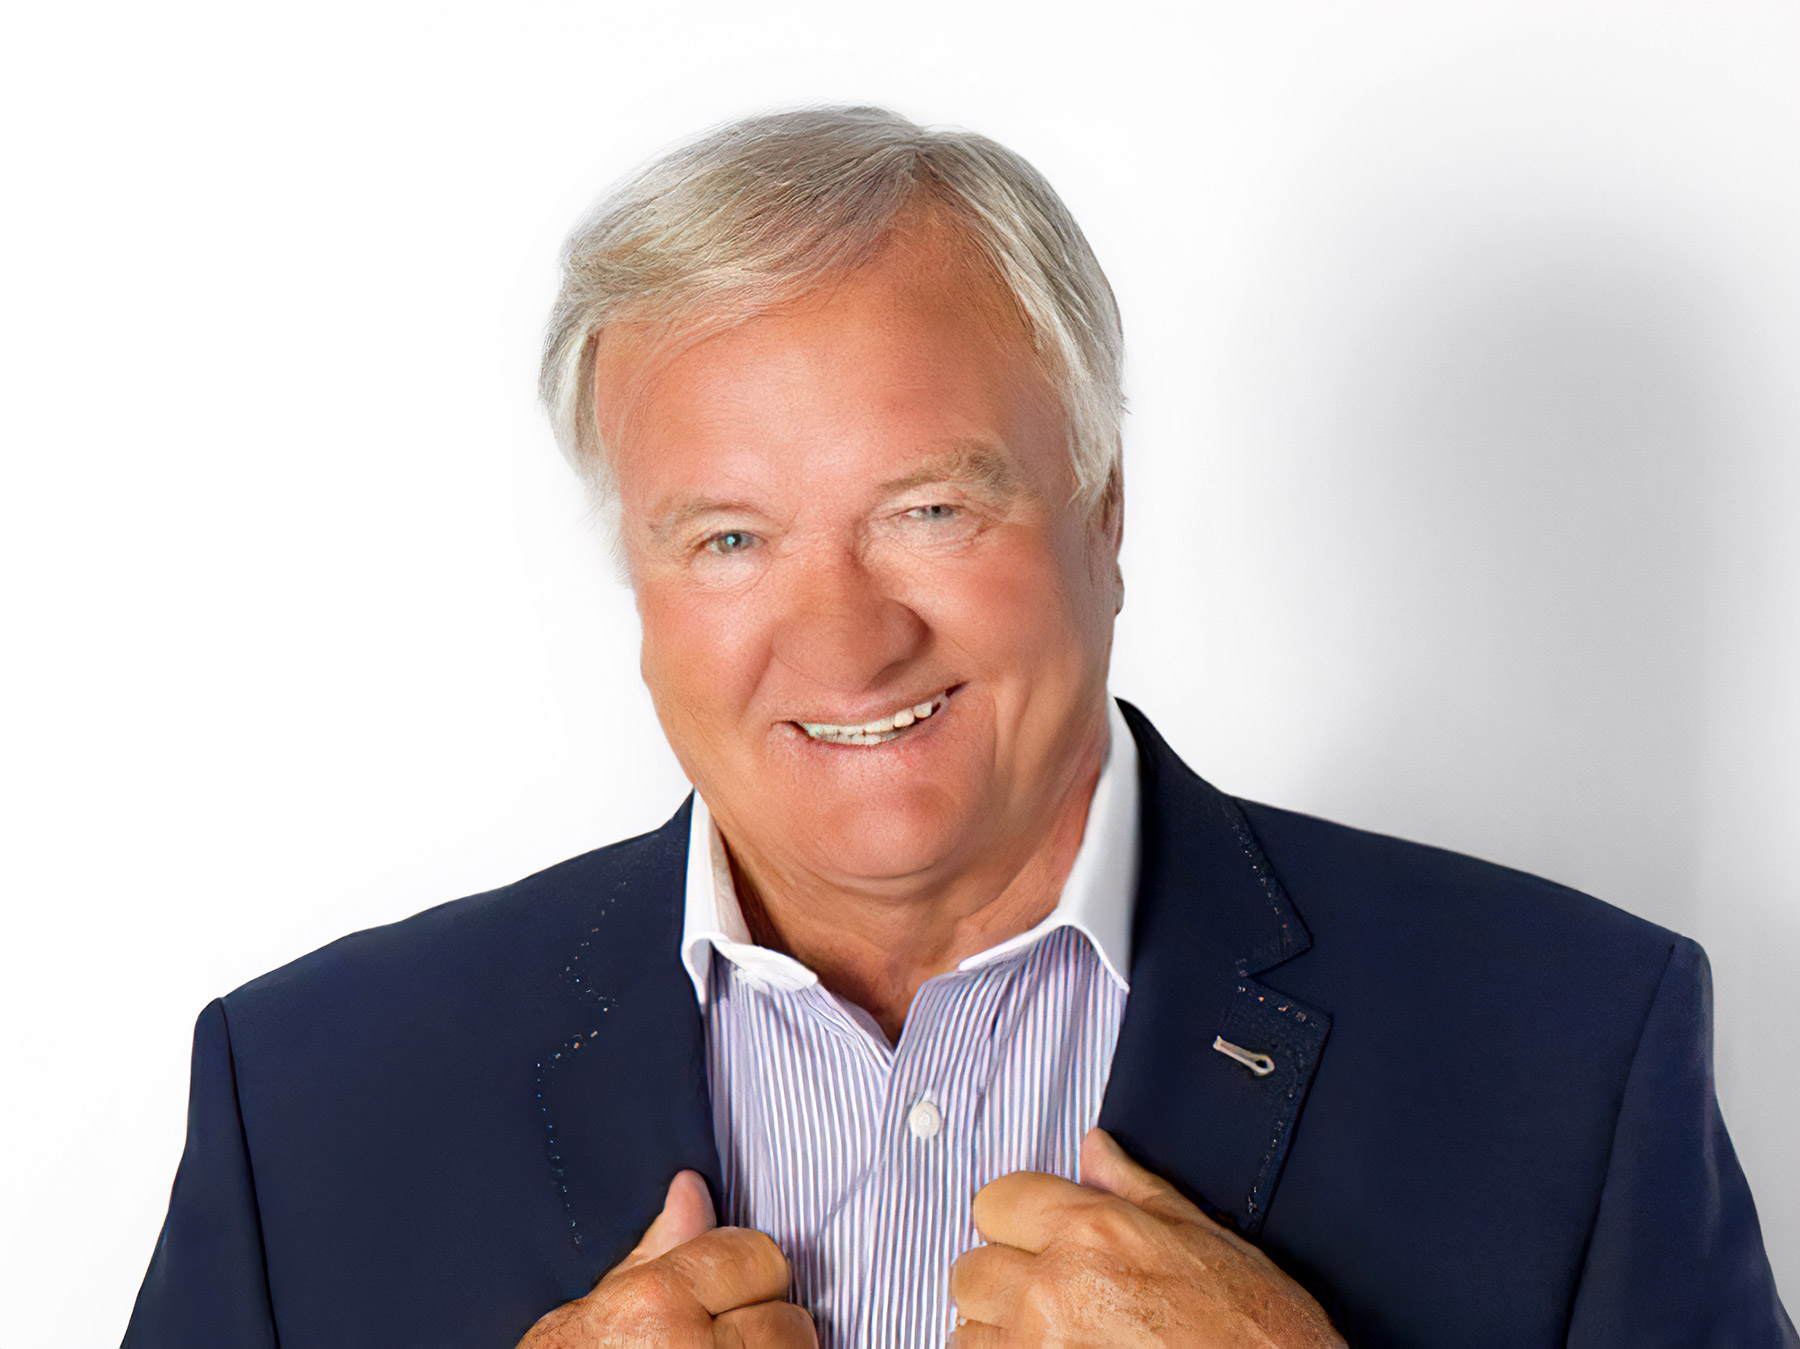 After Dinner Event with Ron Atkinson